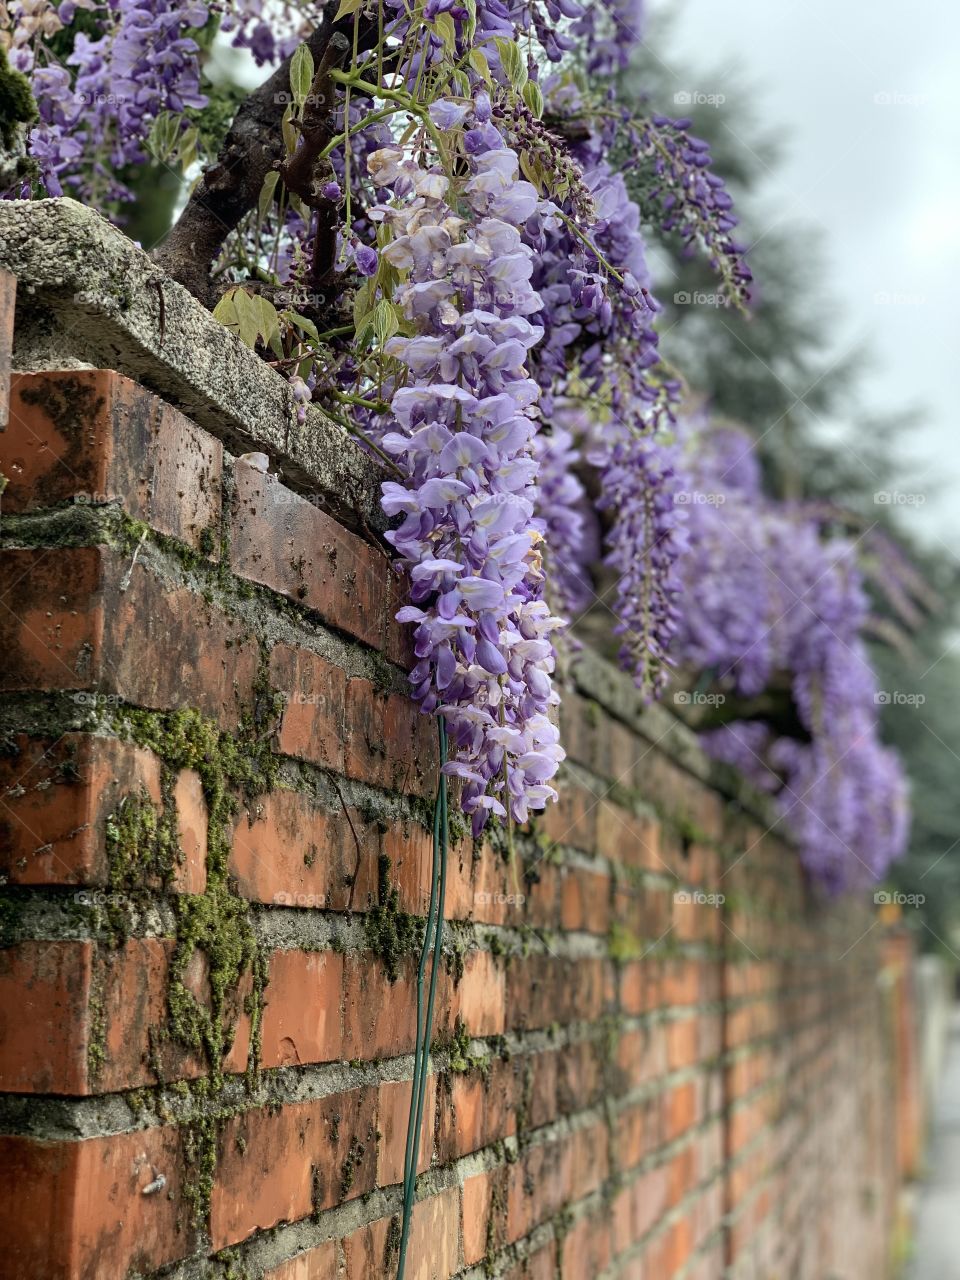 My wall of wisteria 